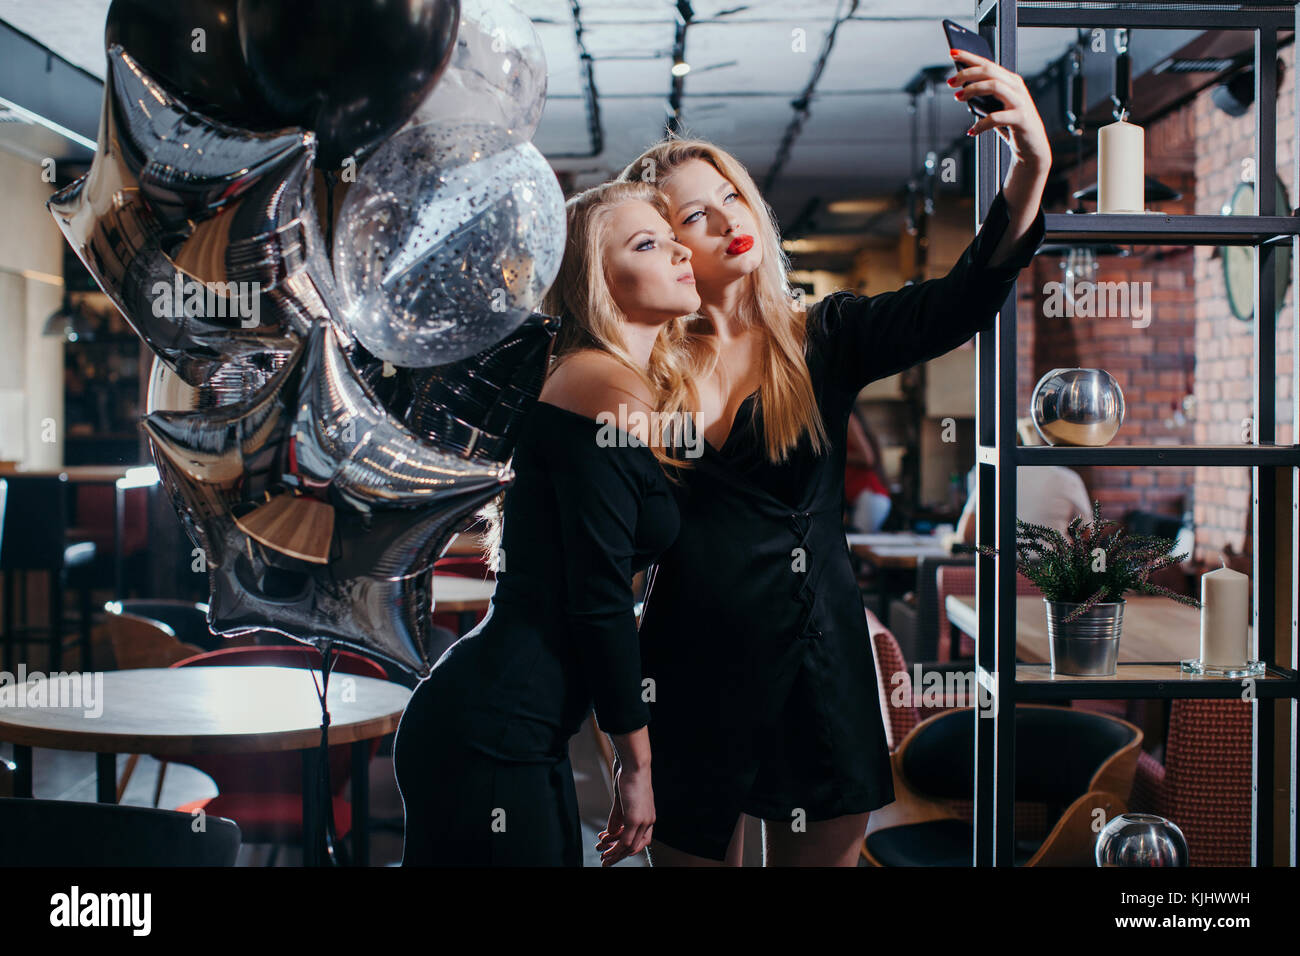 Two women taking selfies in a cafe Stock Photo